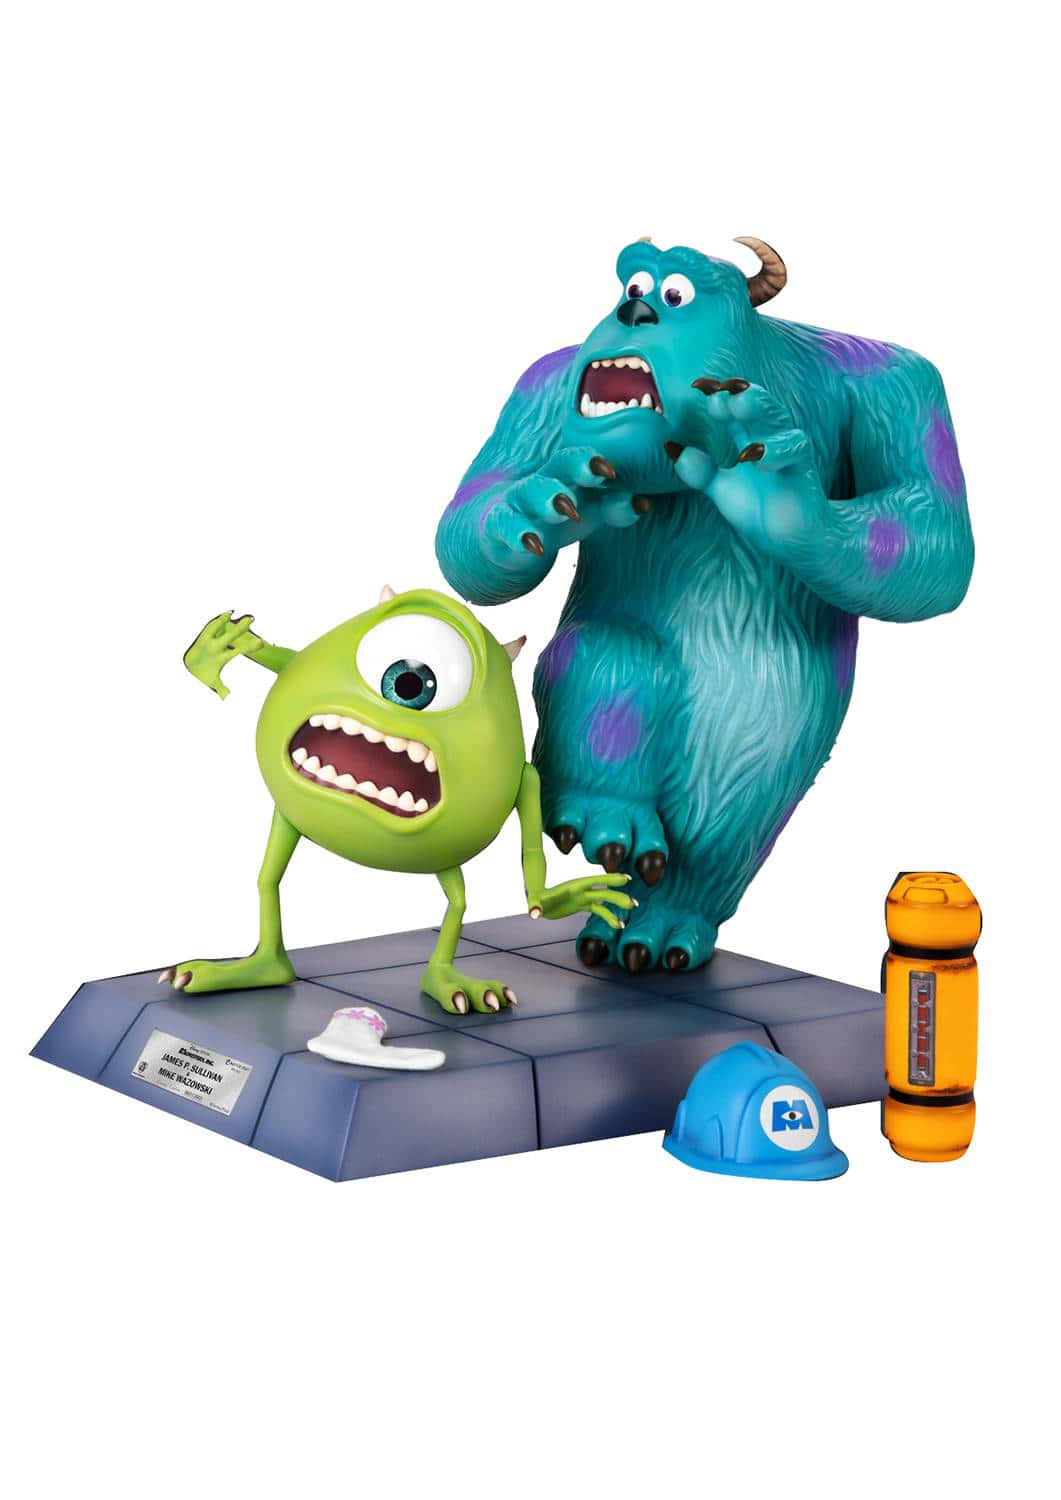 Monsters University Monsters University Monsters University Monsters University Monsters University Monsters University Monsters University Monsters University Monsters University Monsters University Monsters